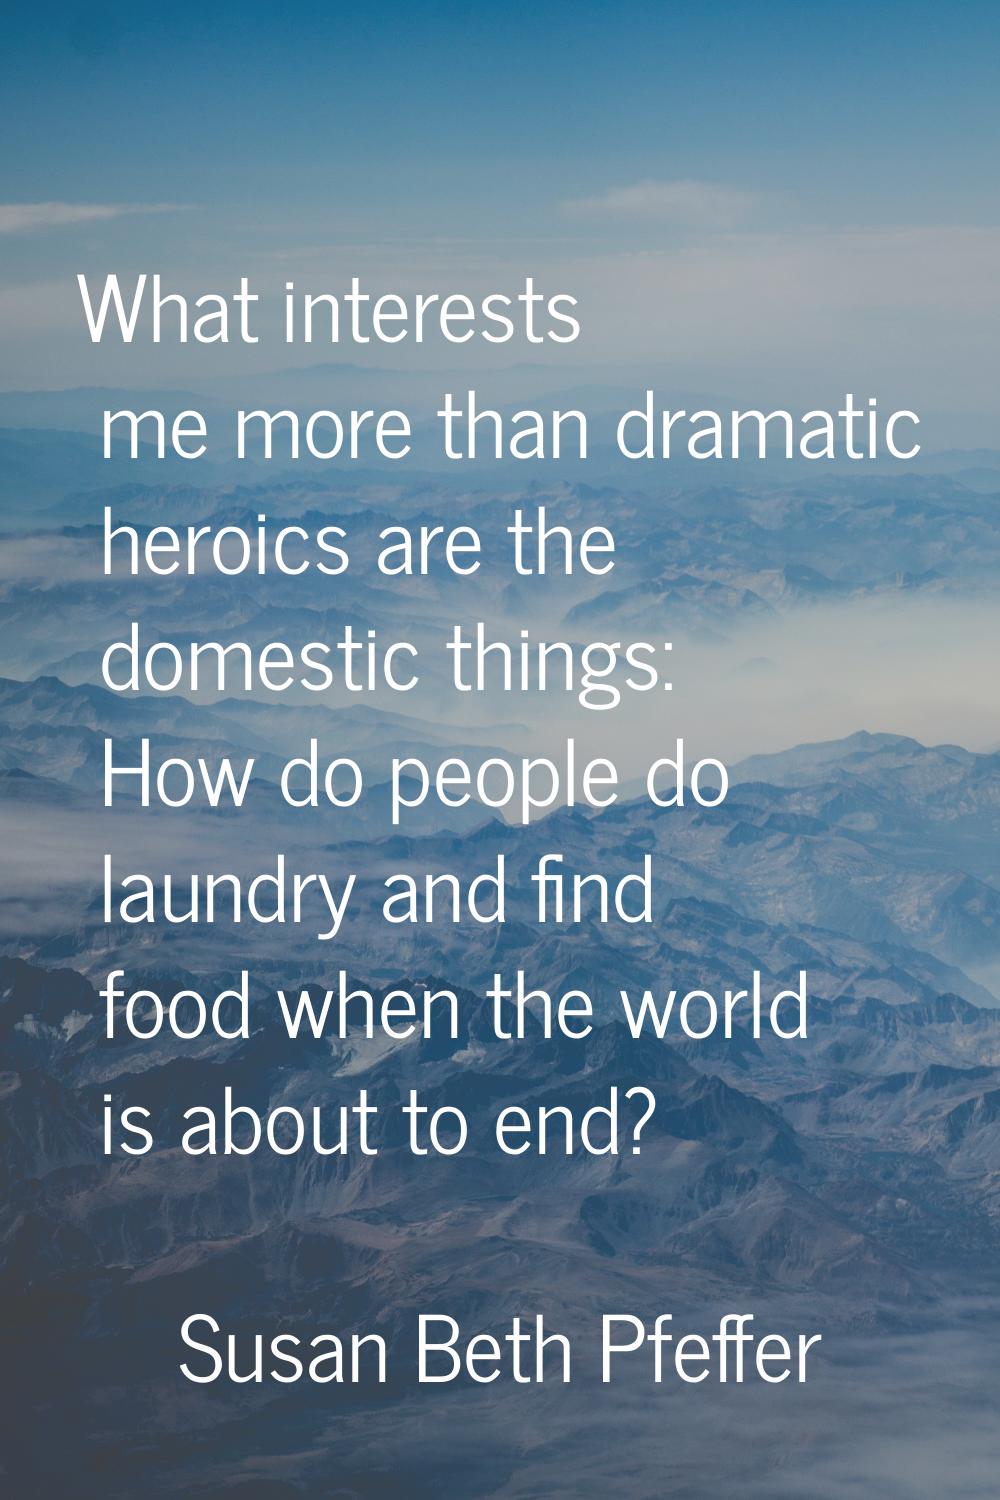 What interests me more than dramatic heroics are the domestic things: How do people do laundry and 